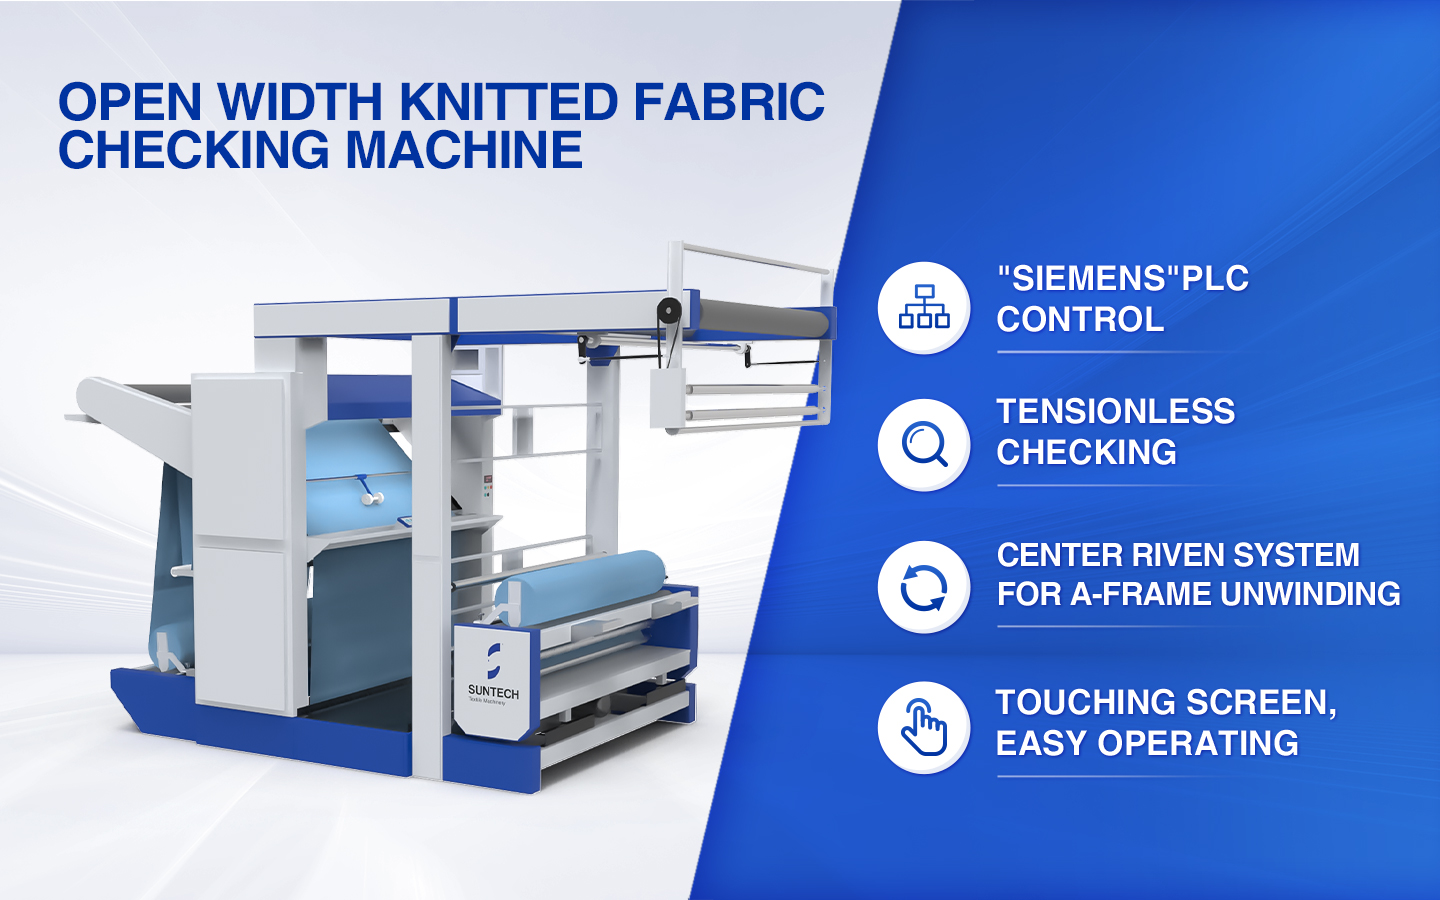  open width knitted fabric inspection machine features